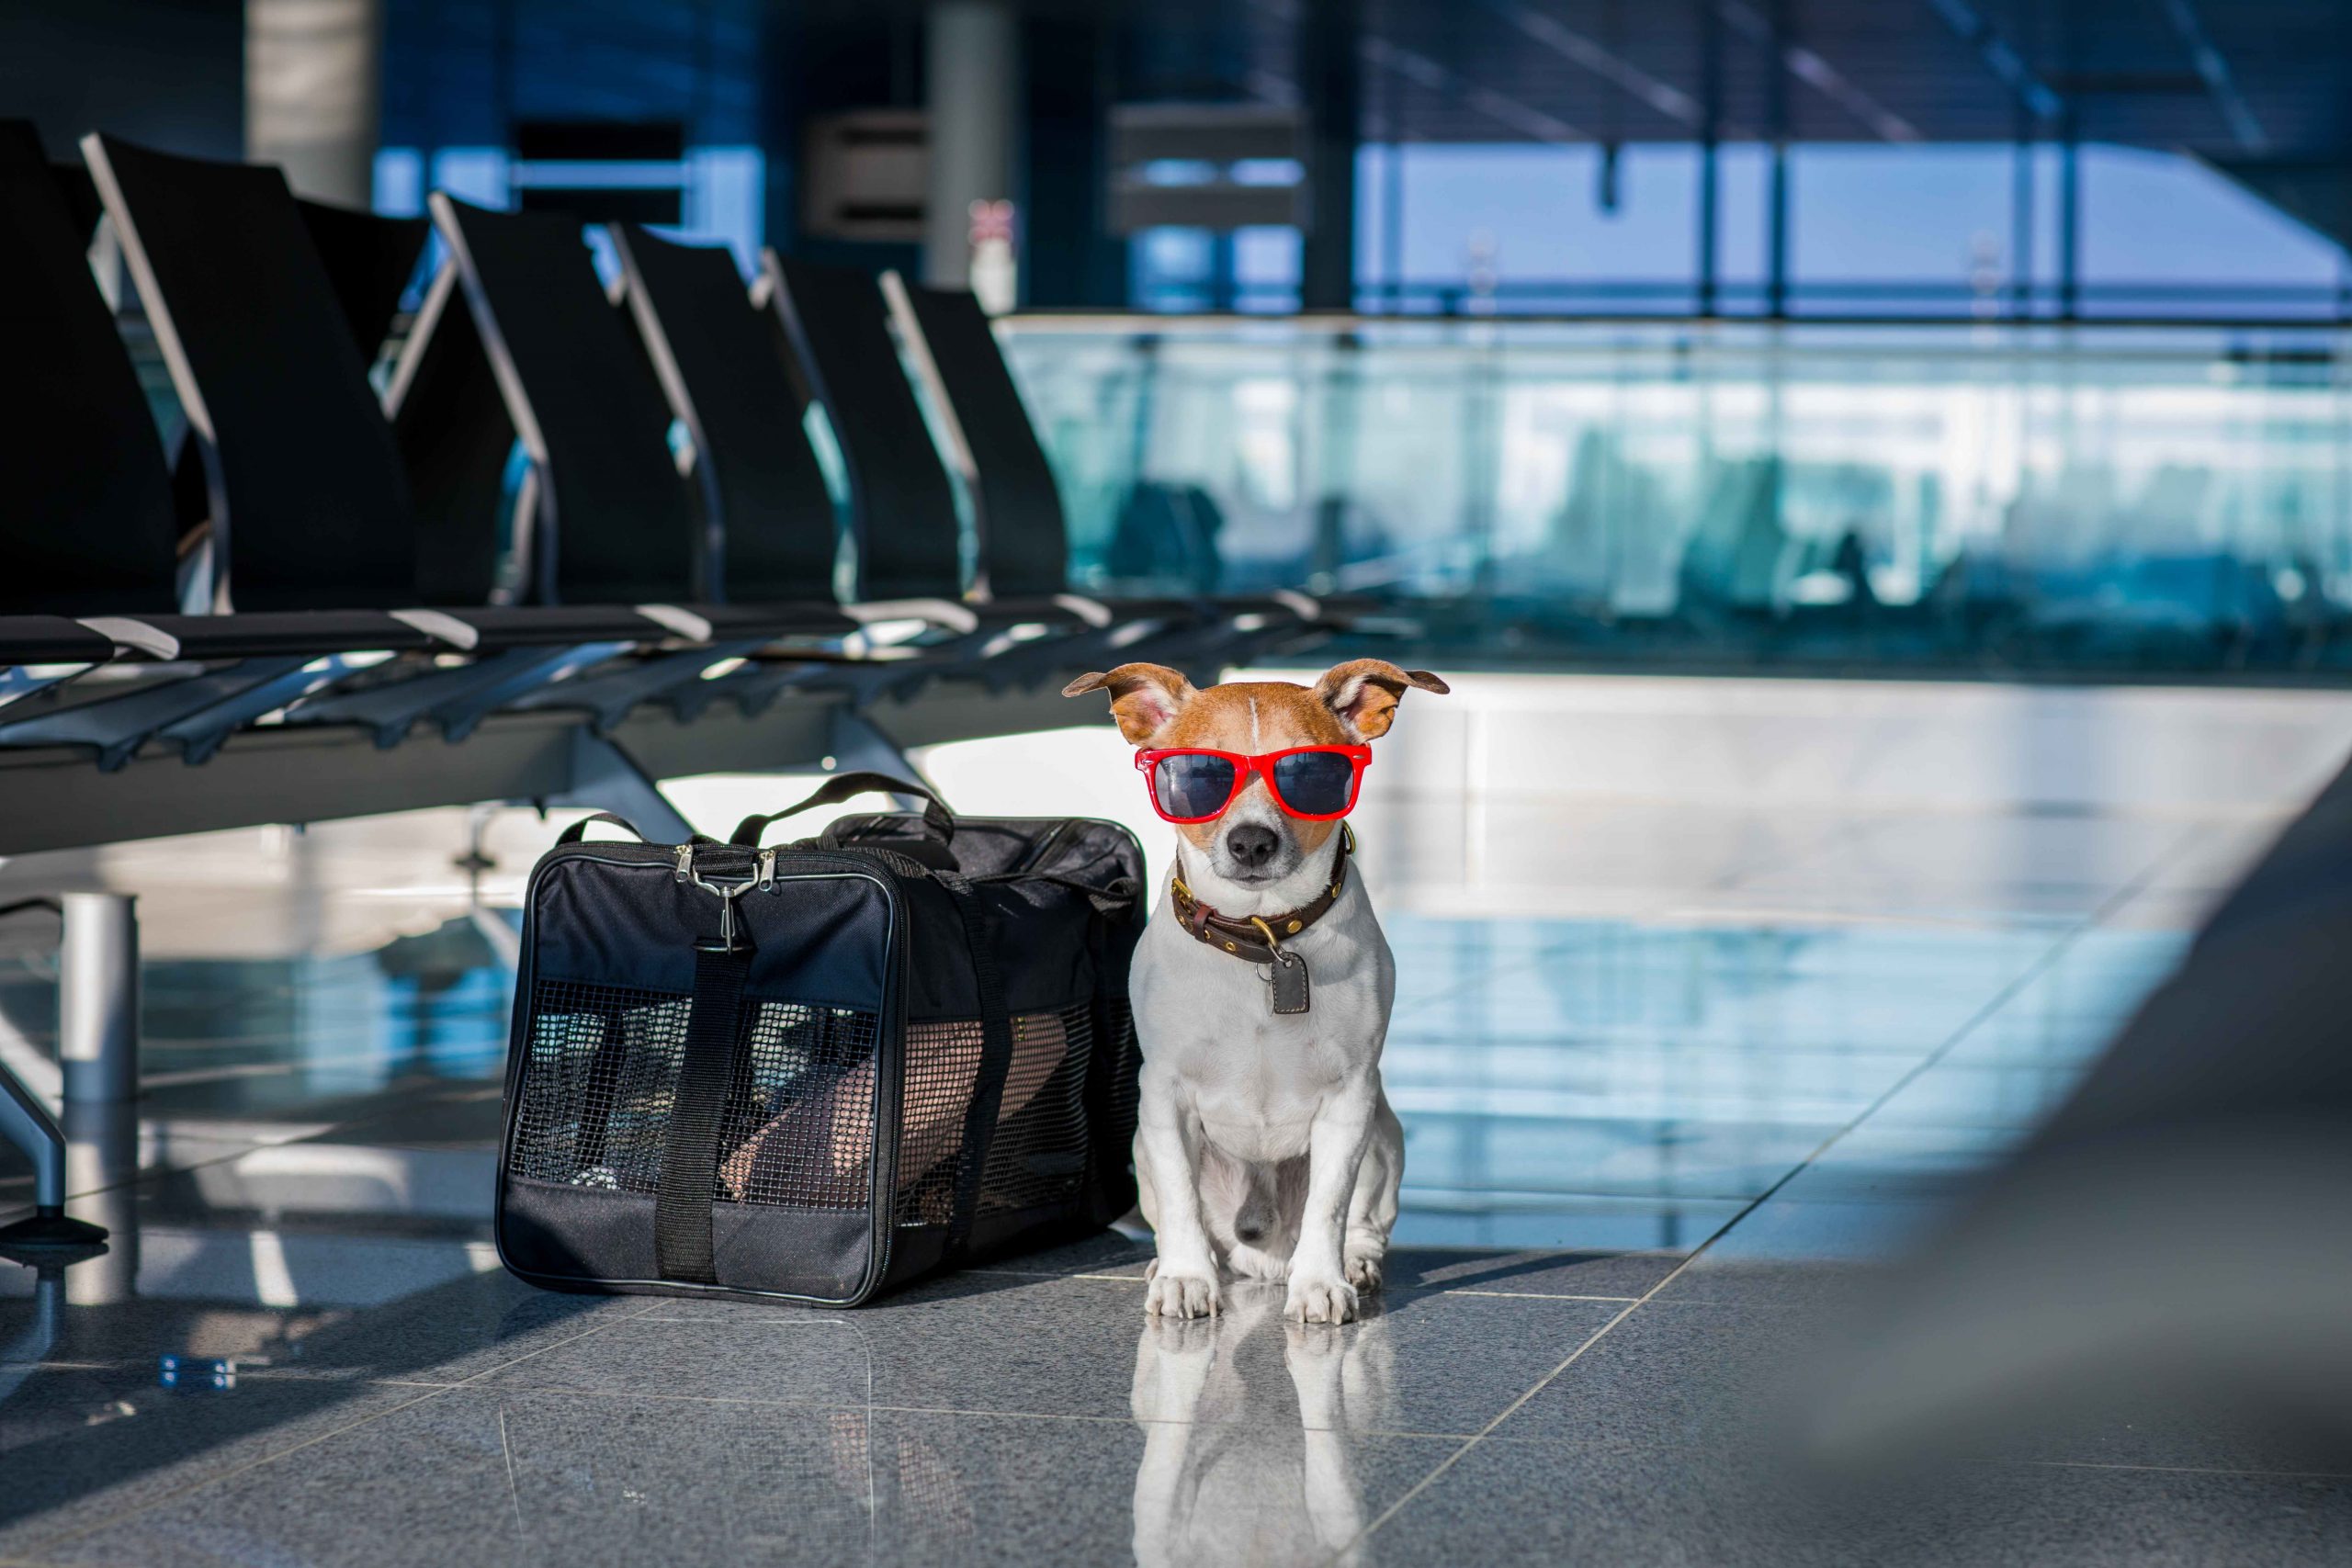 These Dogs Ended Up on a No-Fly List. Their Owners Are Baffled.